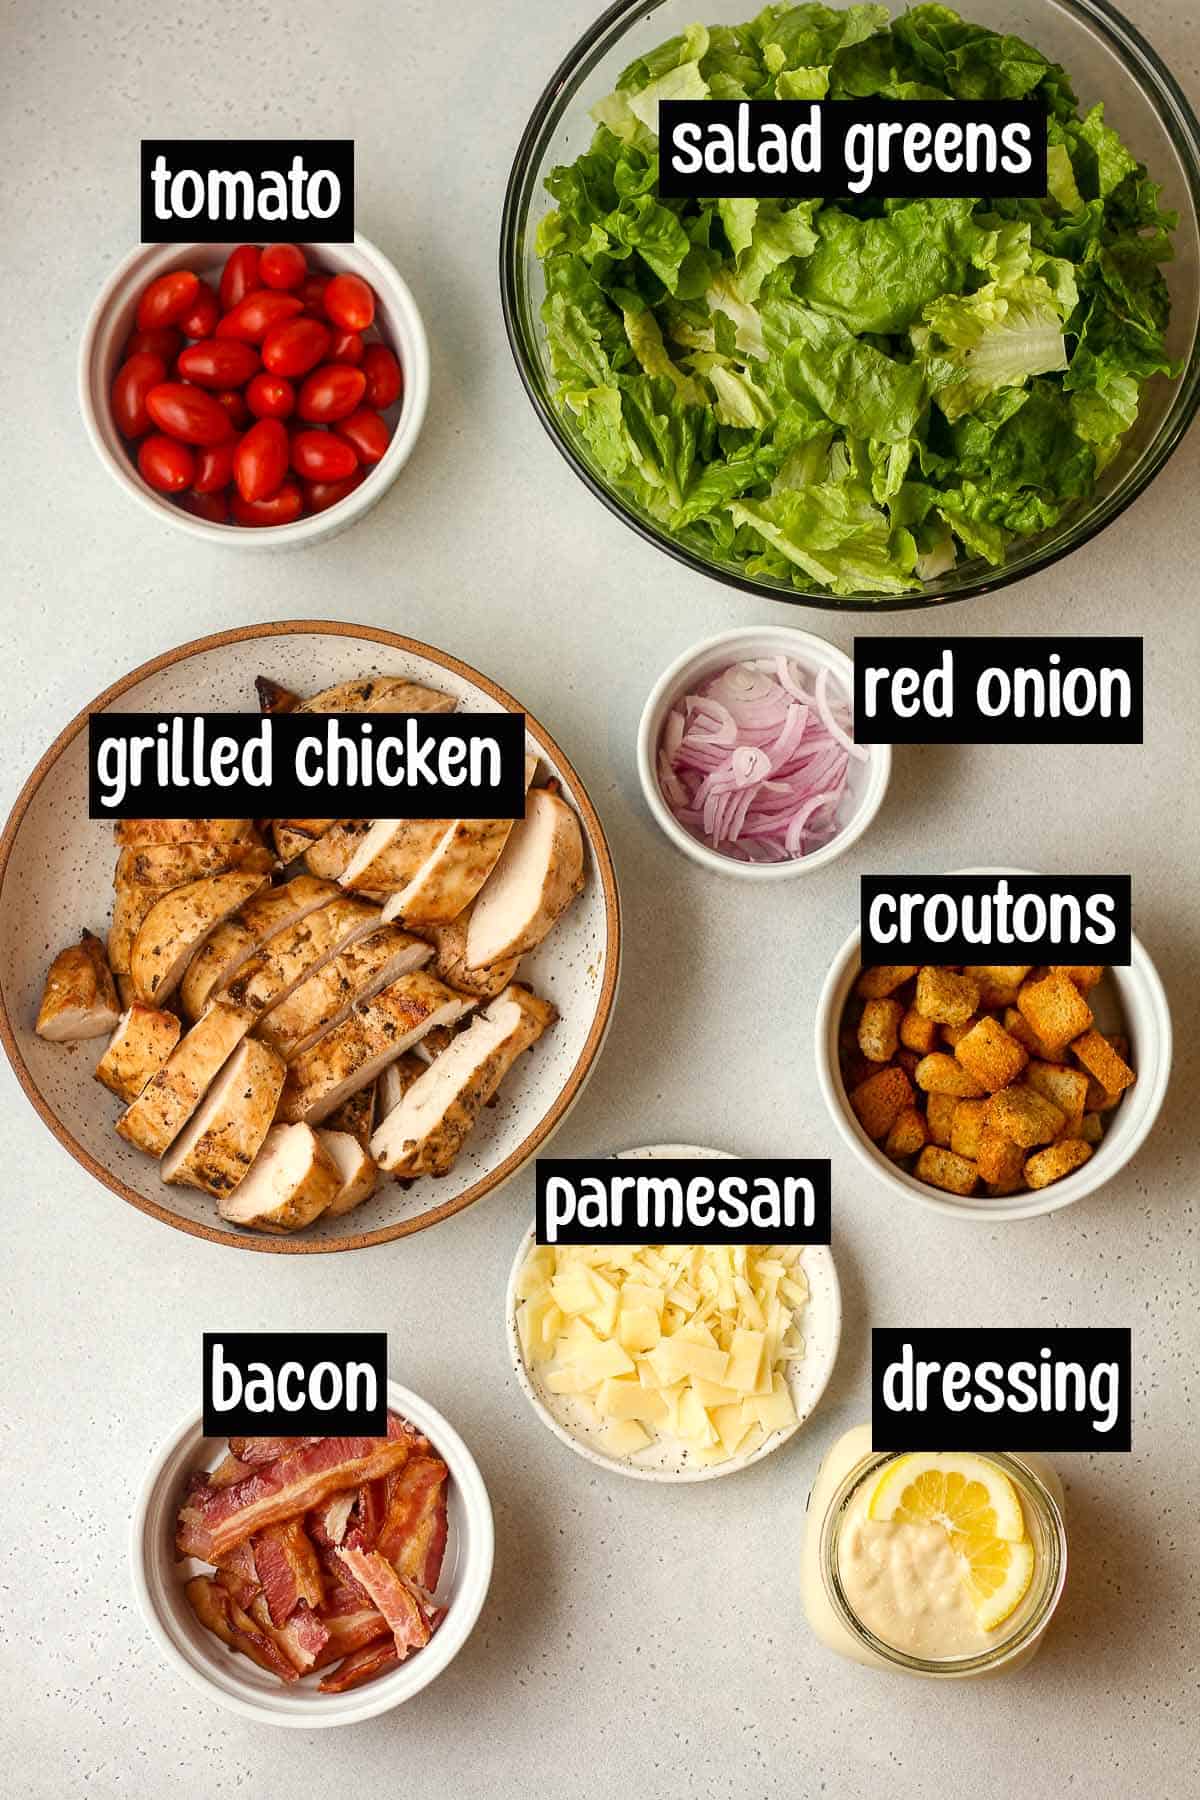 Ingredients for the chicken bacon caesar salad.